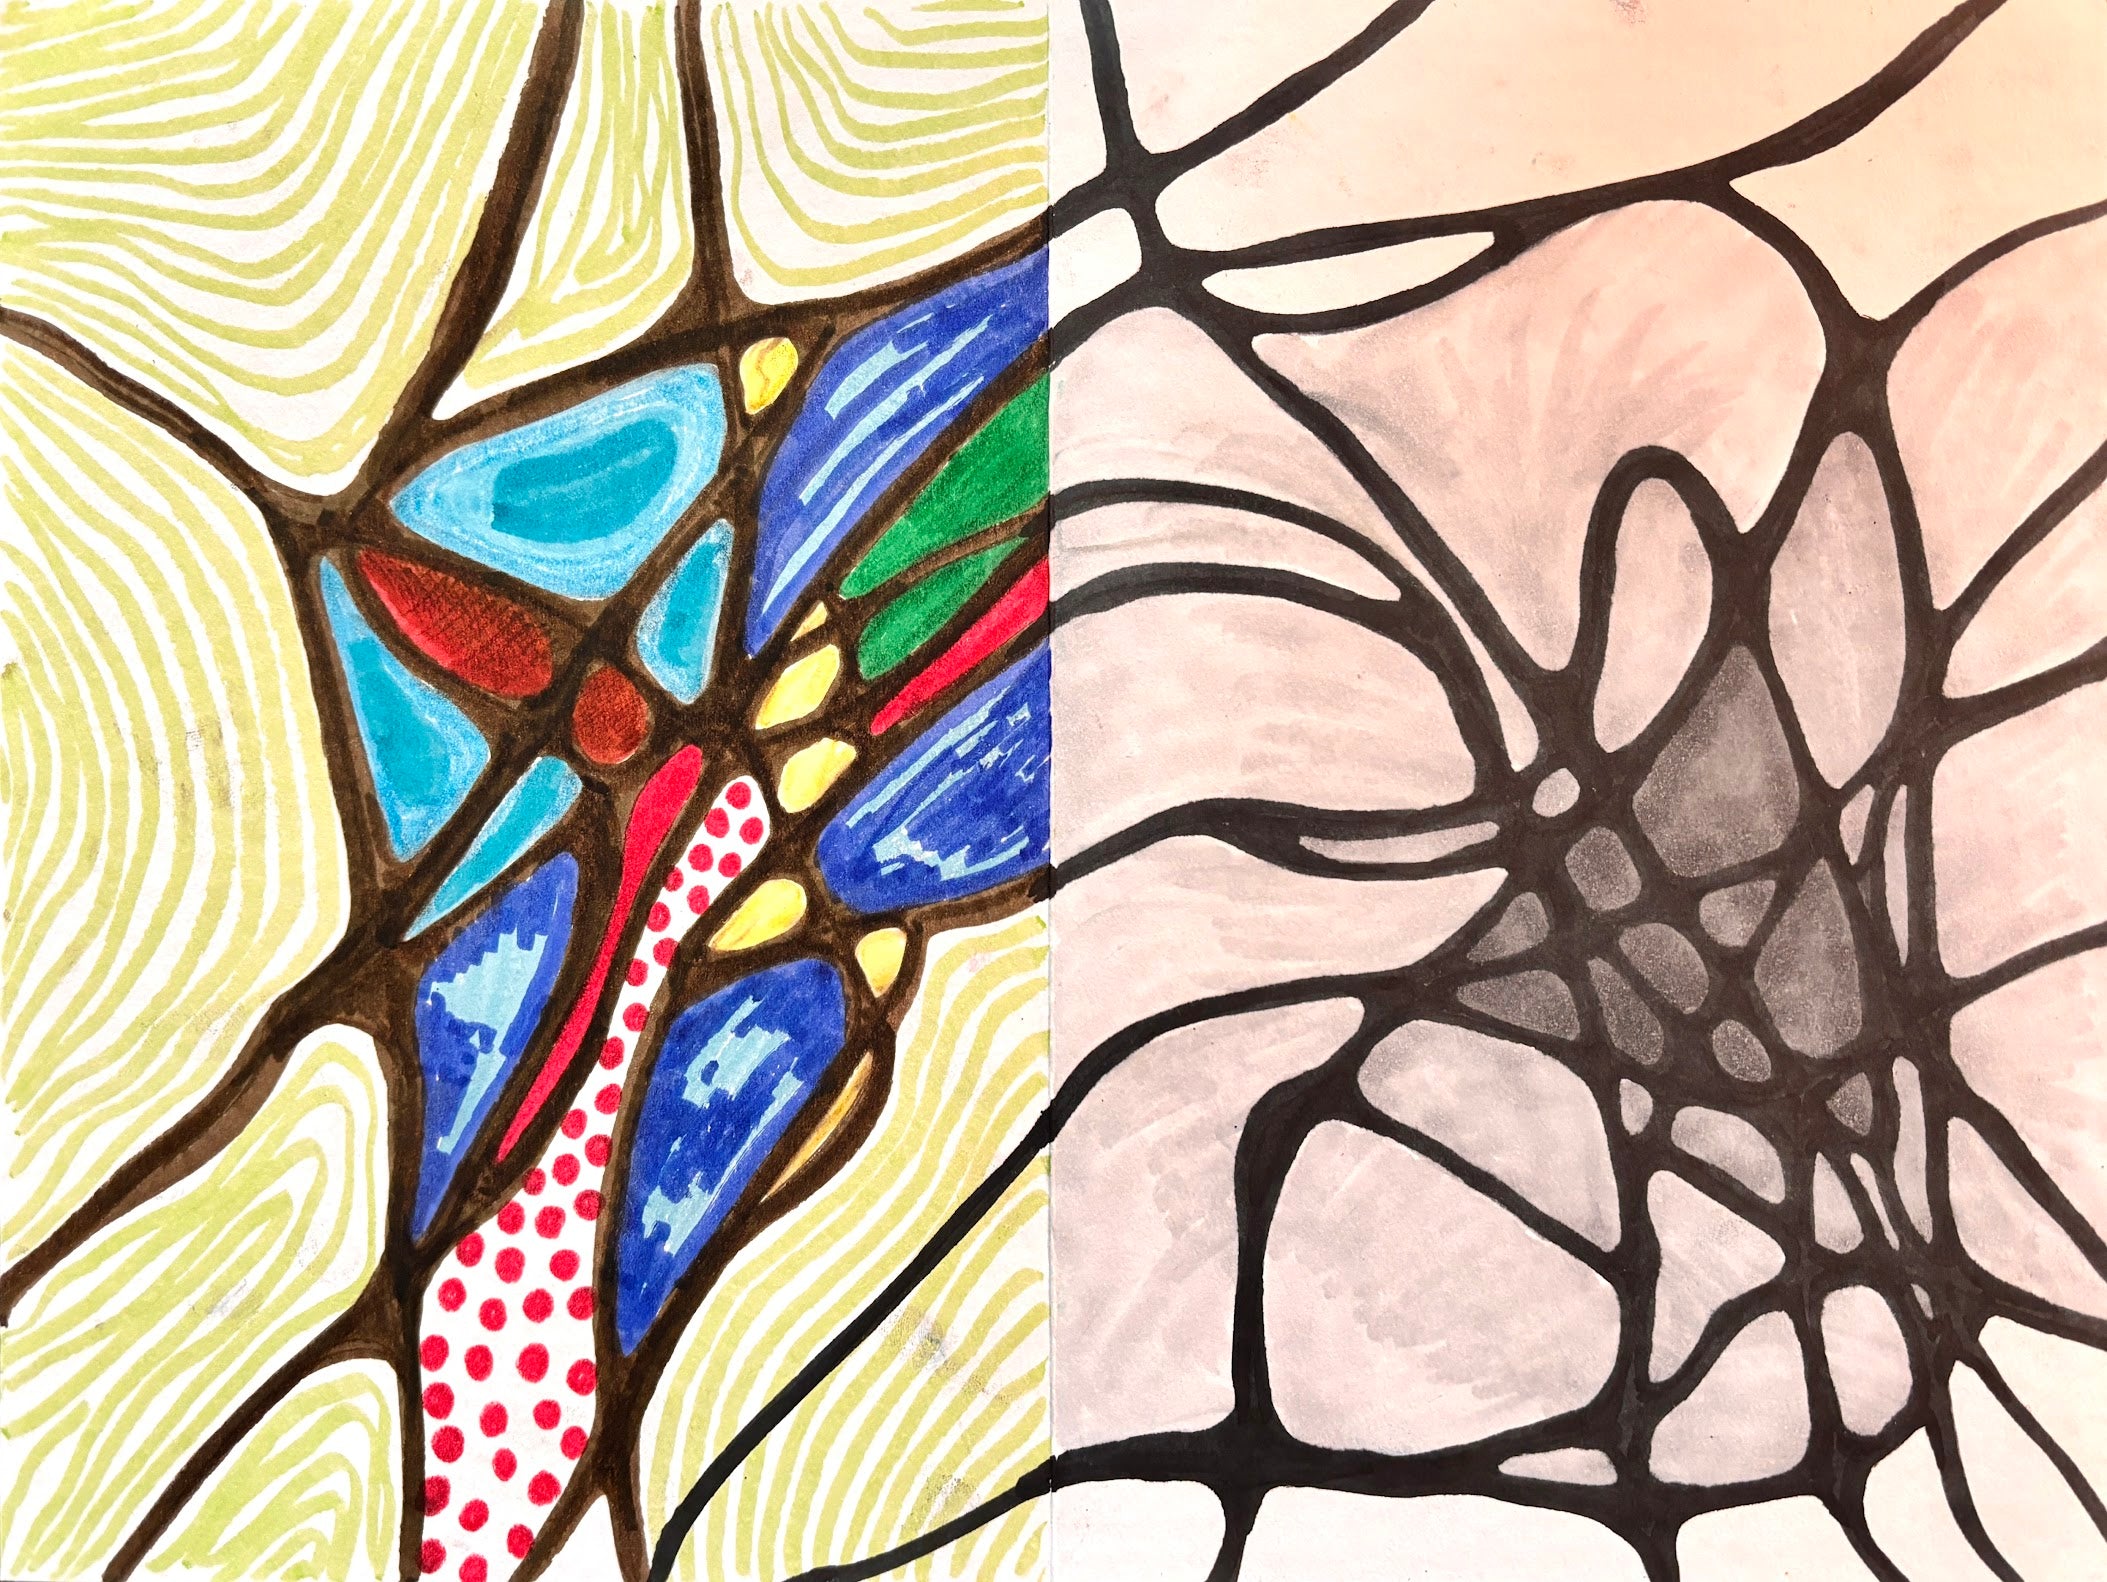 MAY 11th IN-PERSON - Introduction to Neurographic Art with Hannah Schaler